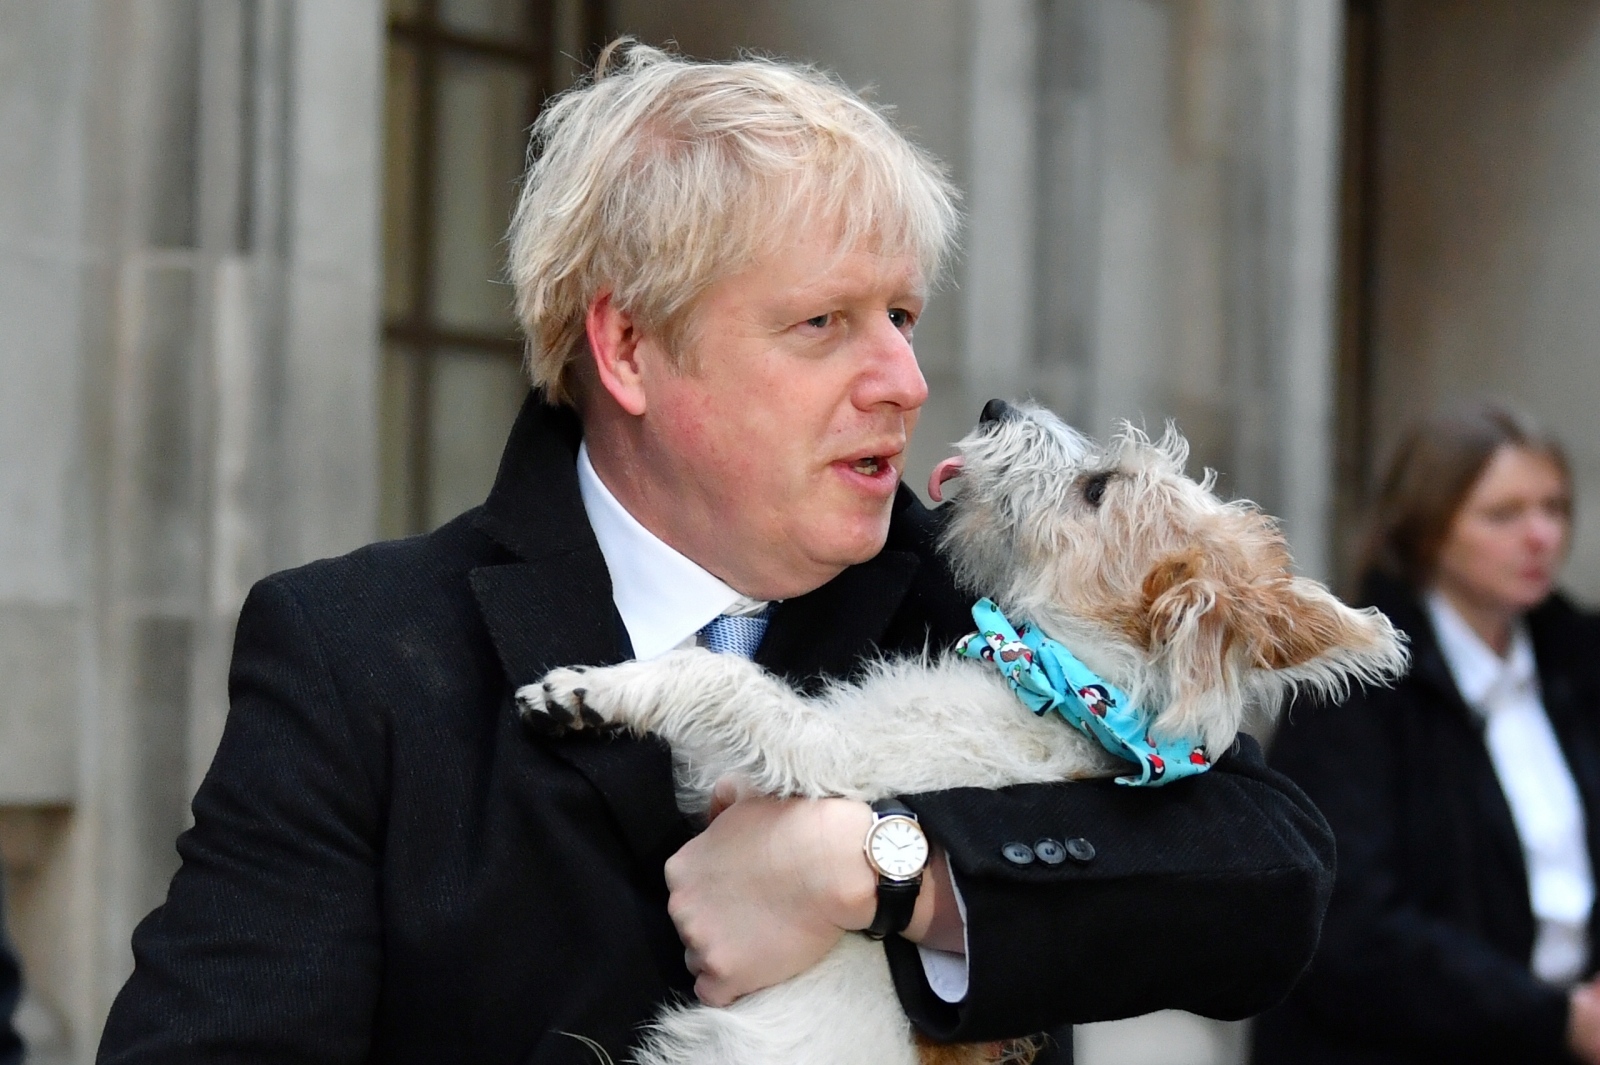 Britain's general election 2019 Britain's Prime Minister Boris Johnson holds his dog Dilyn as leaves a polling station, at the Methodist Central Hall, after voting in the general election in London, Britain, December 12, 2019. REUTERS/Dylan Martinez DYLAN MARTINEZ